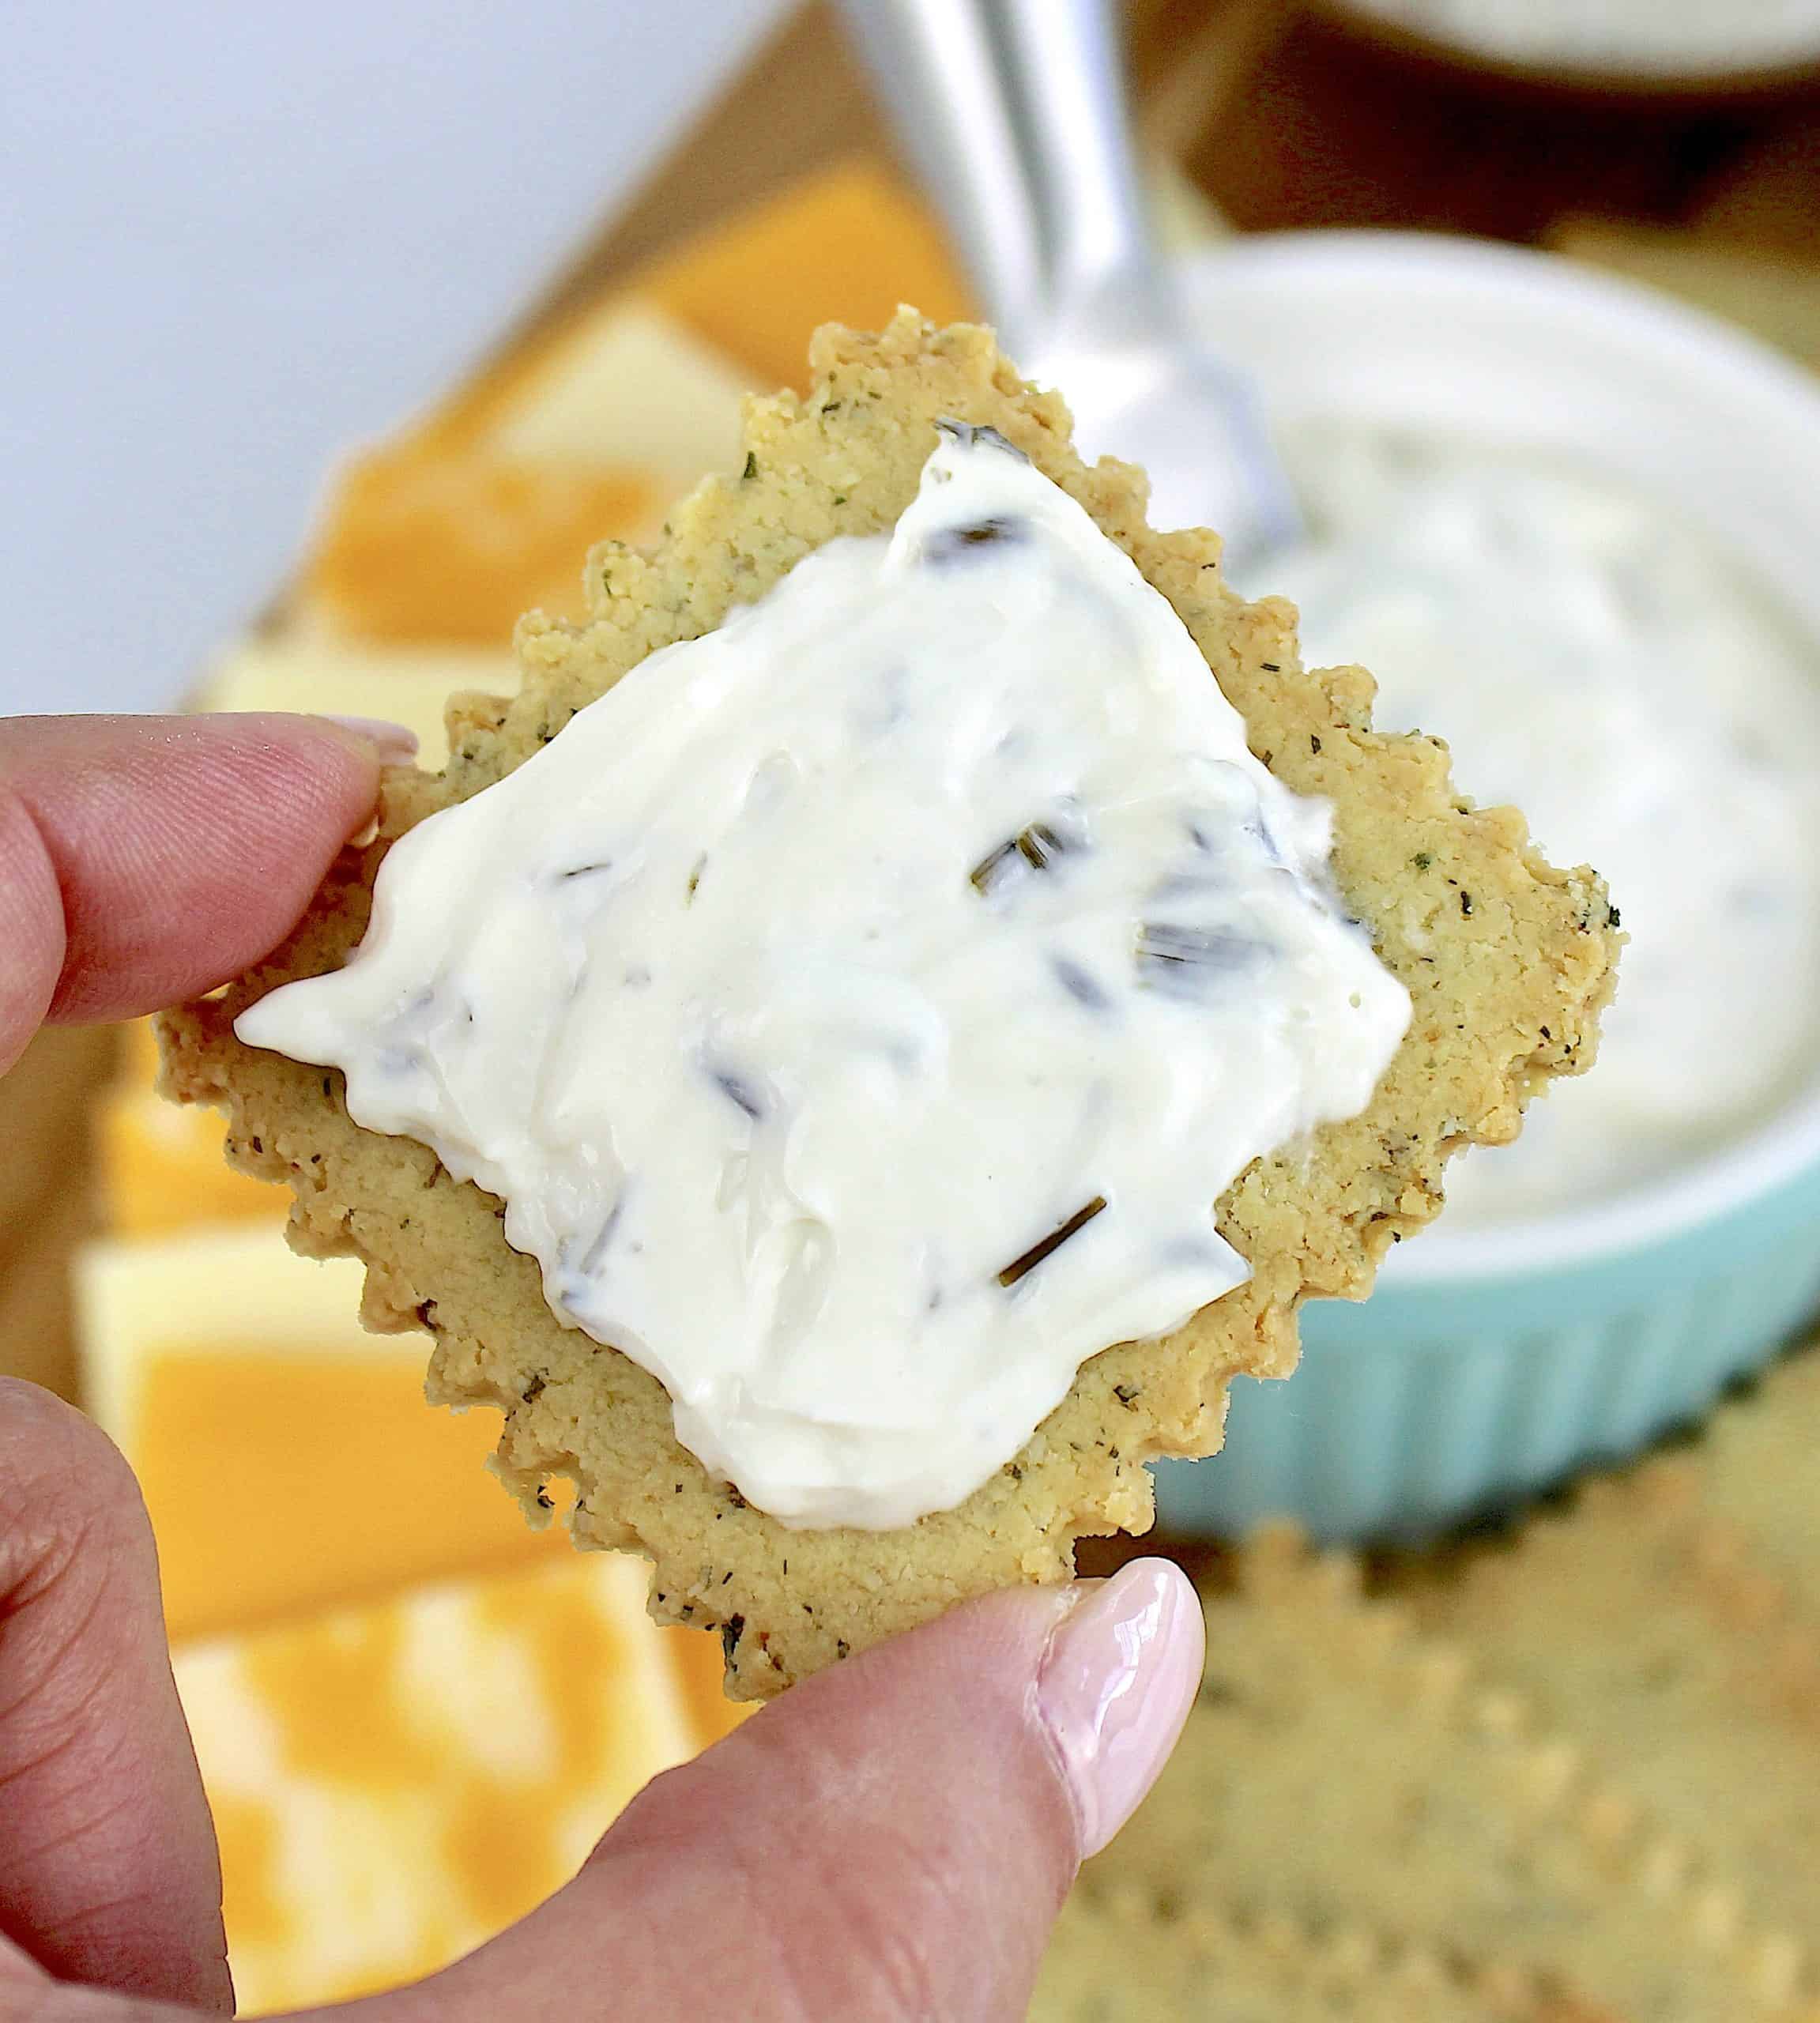 holding up ranch cracker with chive spread on top